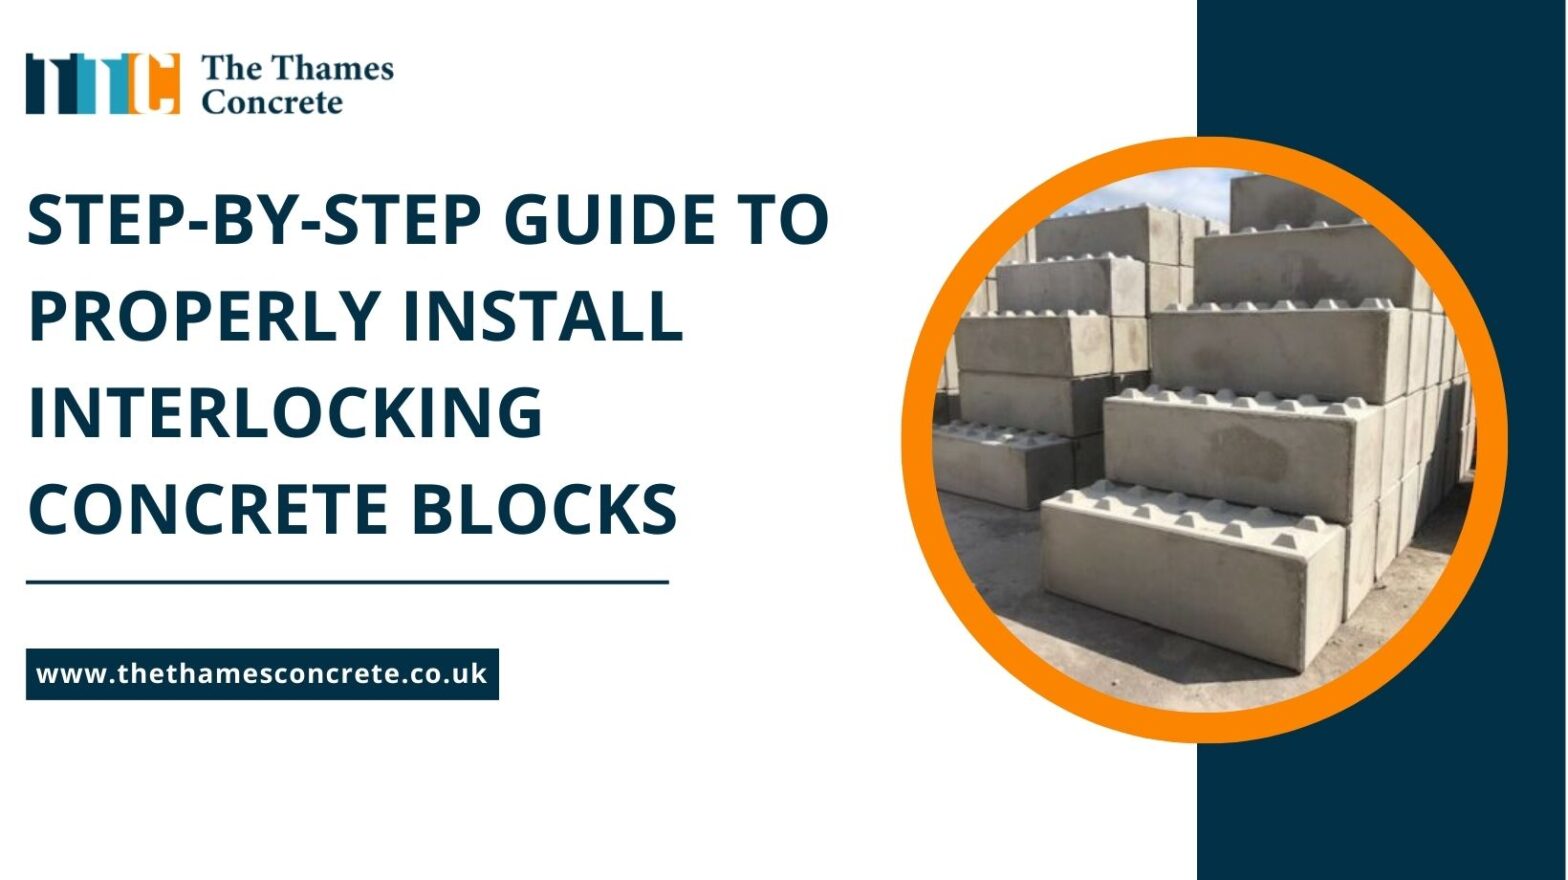 Step-By-Step Guide to Properly Install Interlocking Concrete Blocks